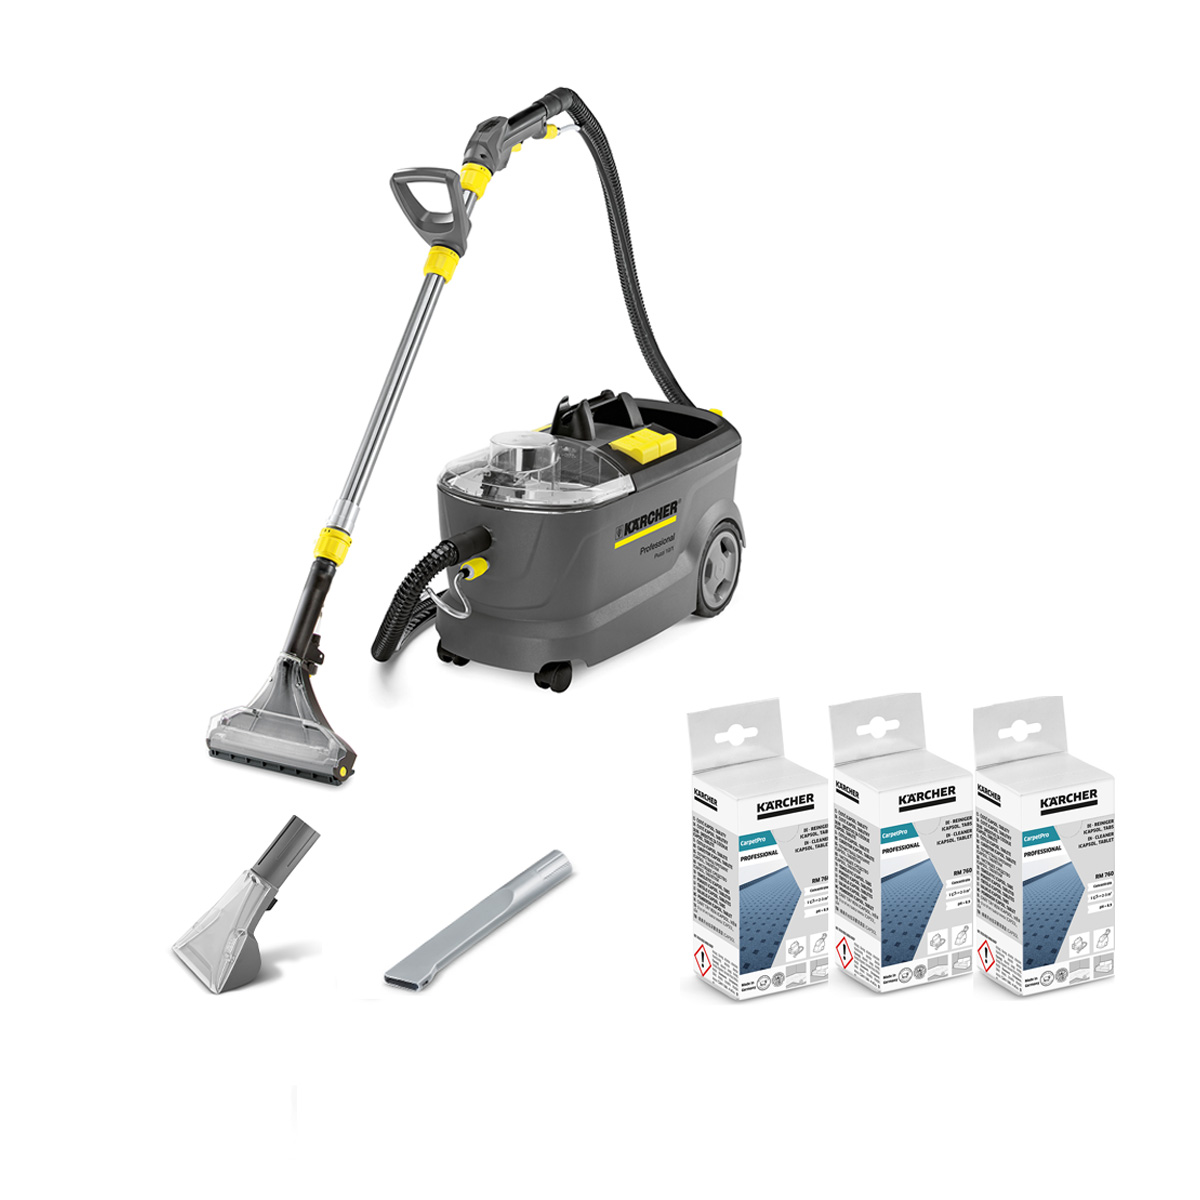 KARCHER Puzzi 10/1 & 8/1C - Spray Extraction Cleaners 